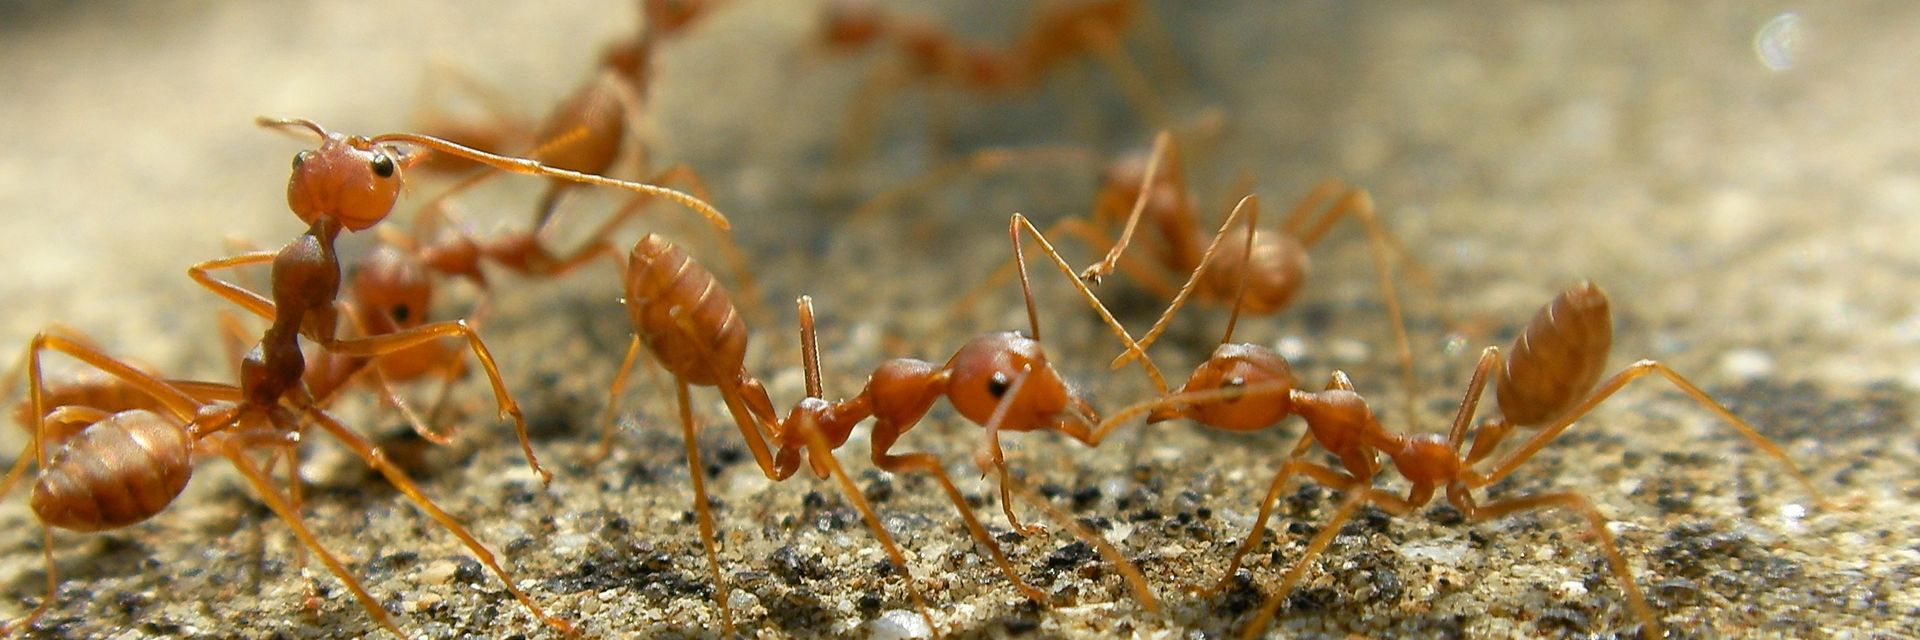 5 Frightening Facts about Fire Ants